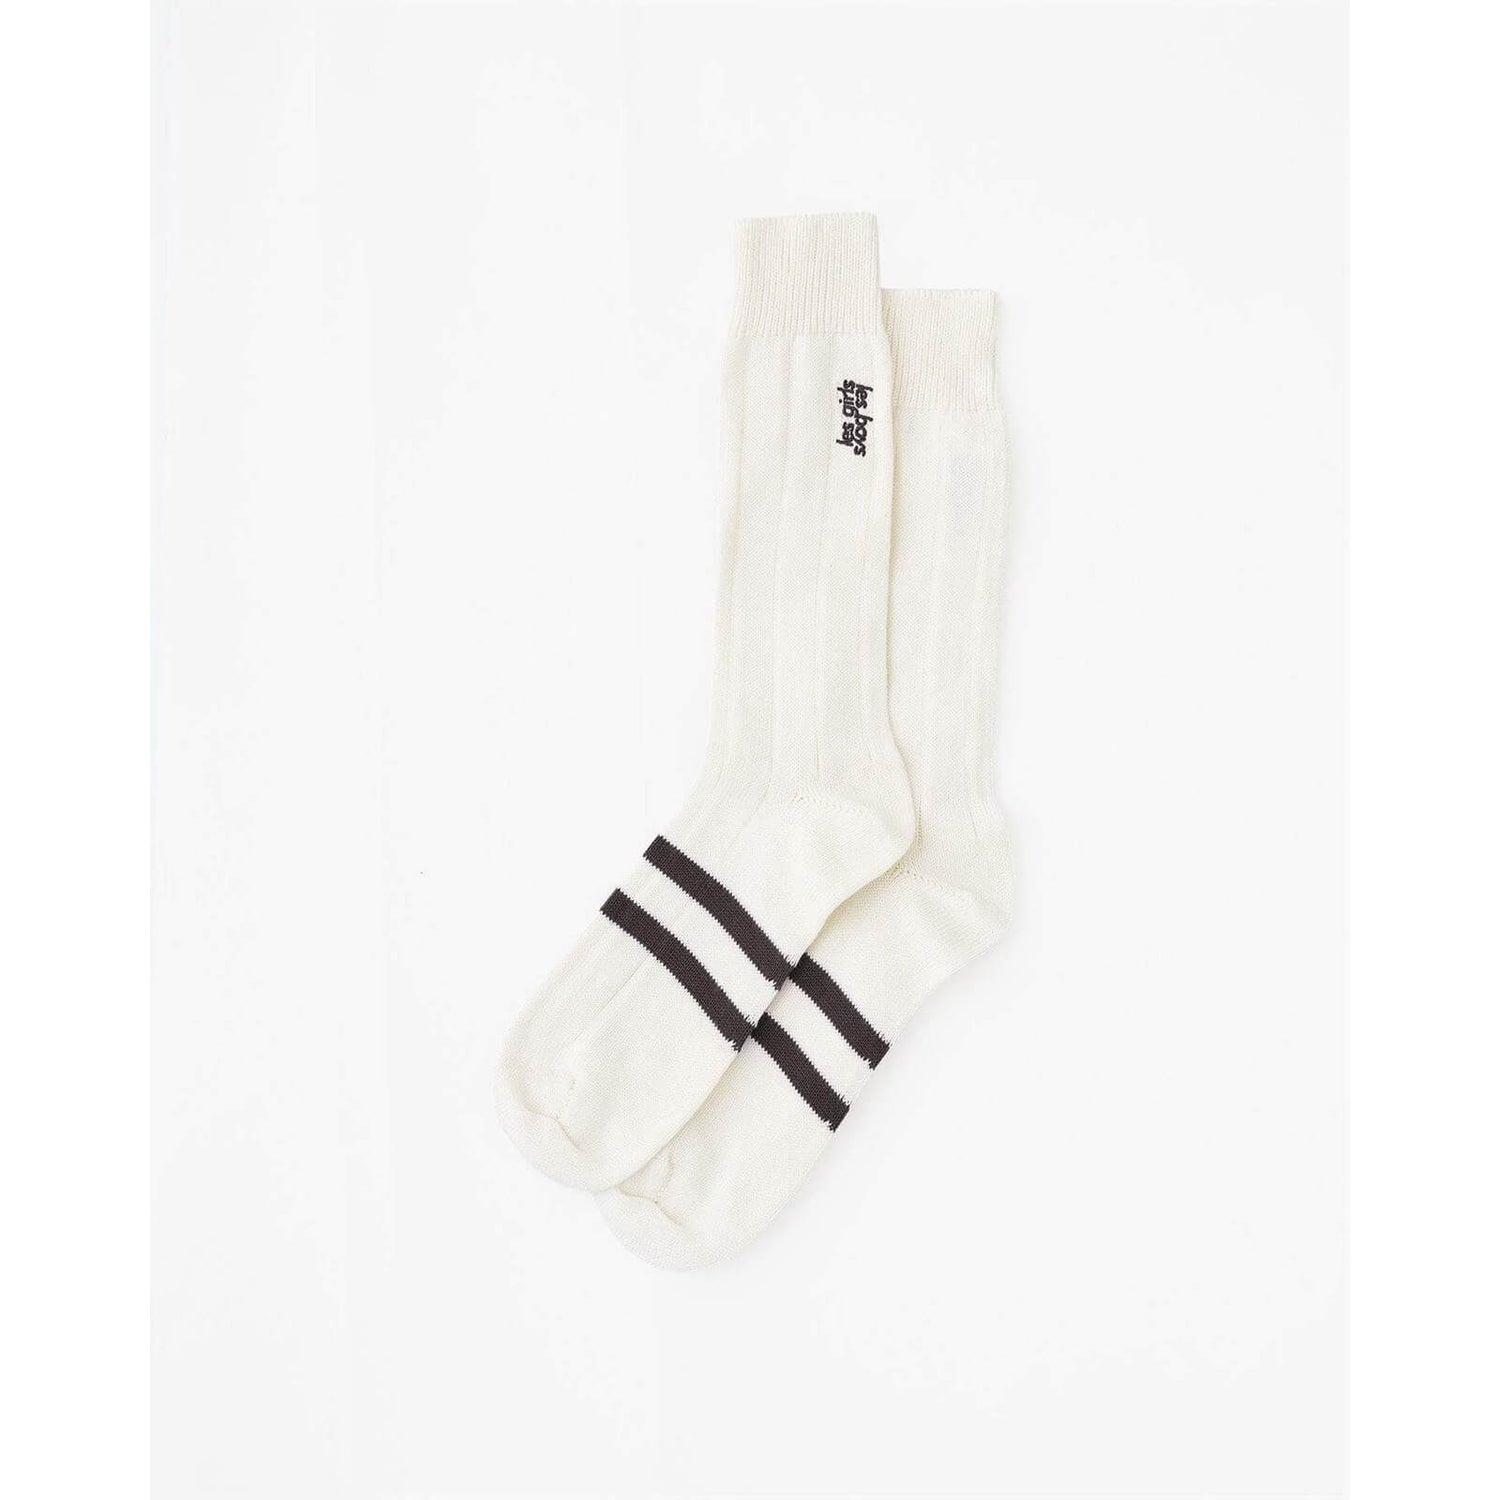 Les Girls Les Boys Women's Embroidered Cotton Mid Calf Socks - Off White